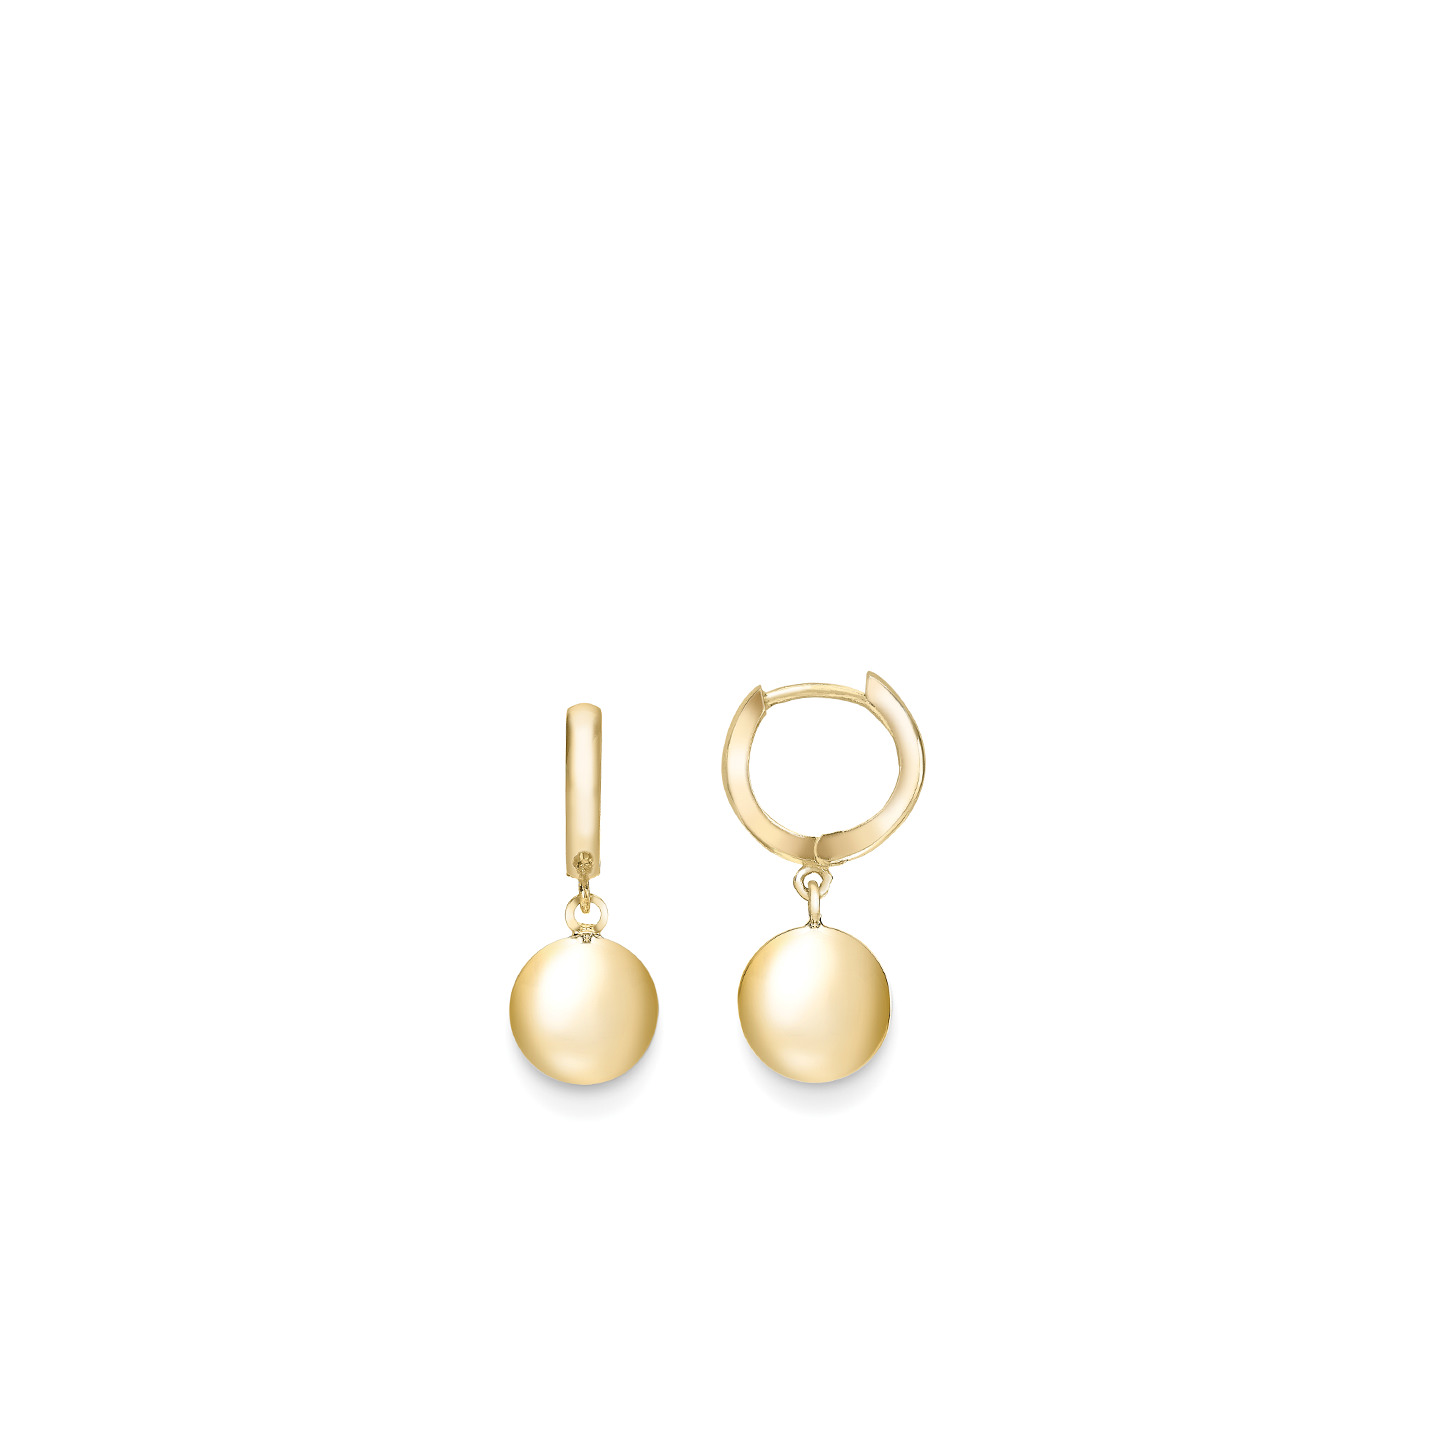 Yellow Gold Huggie Earring with Ball Drop